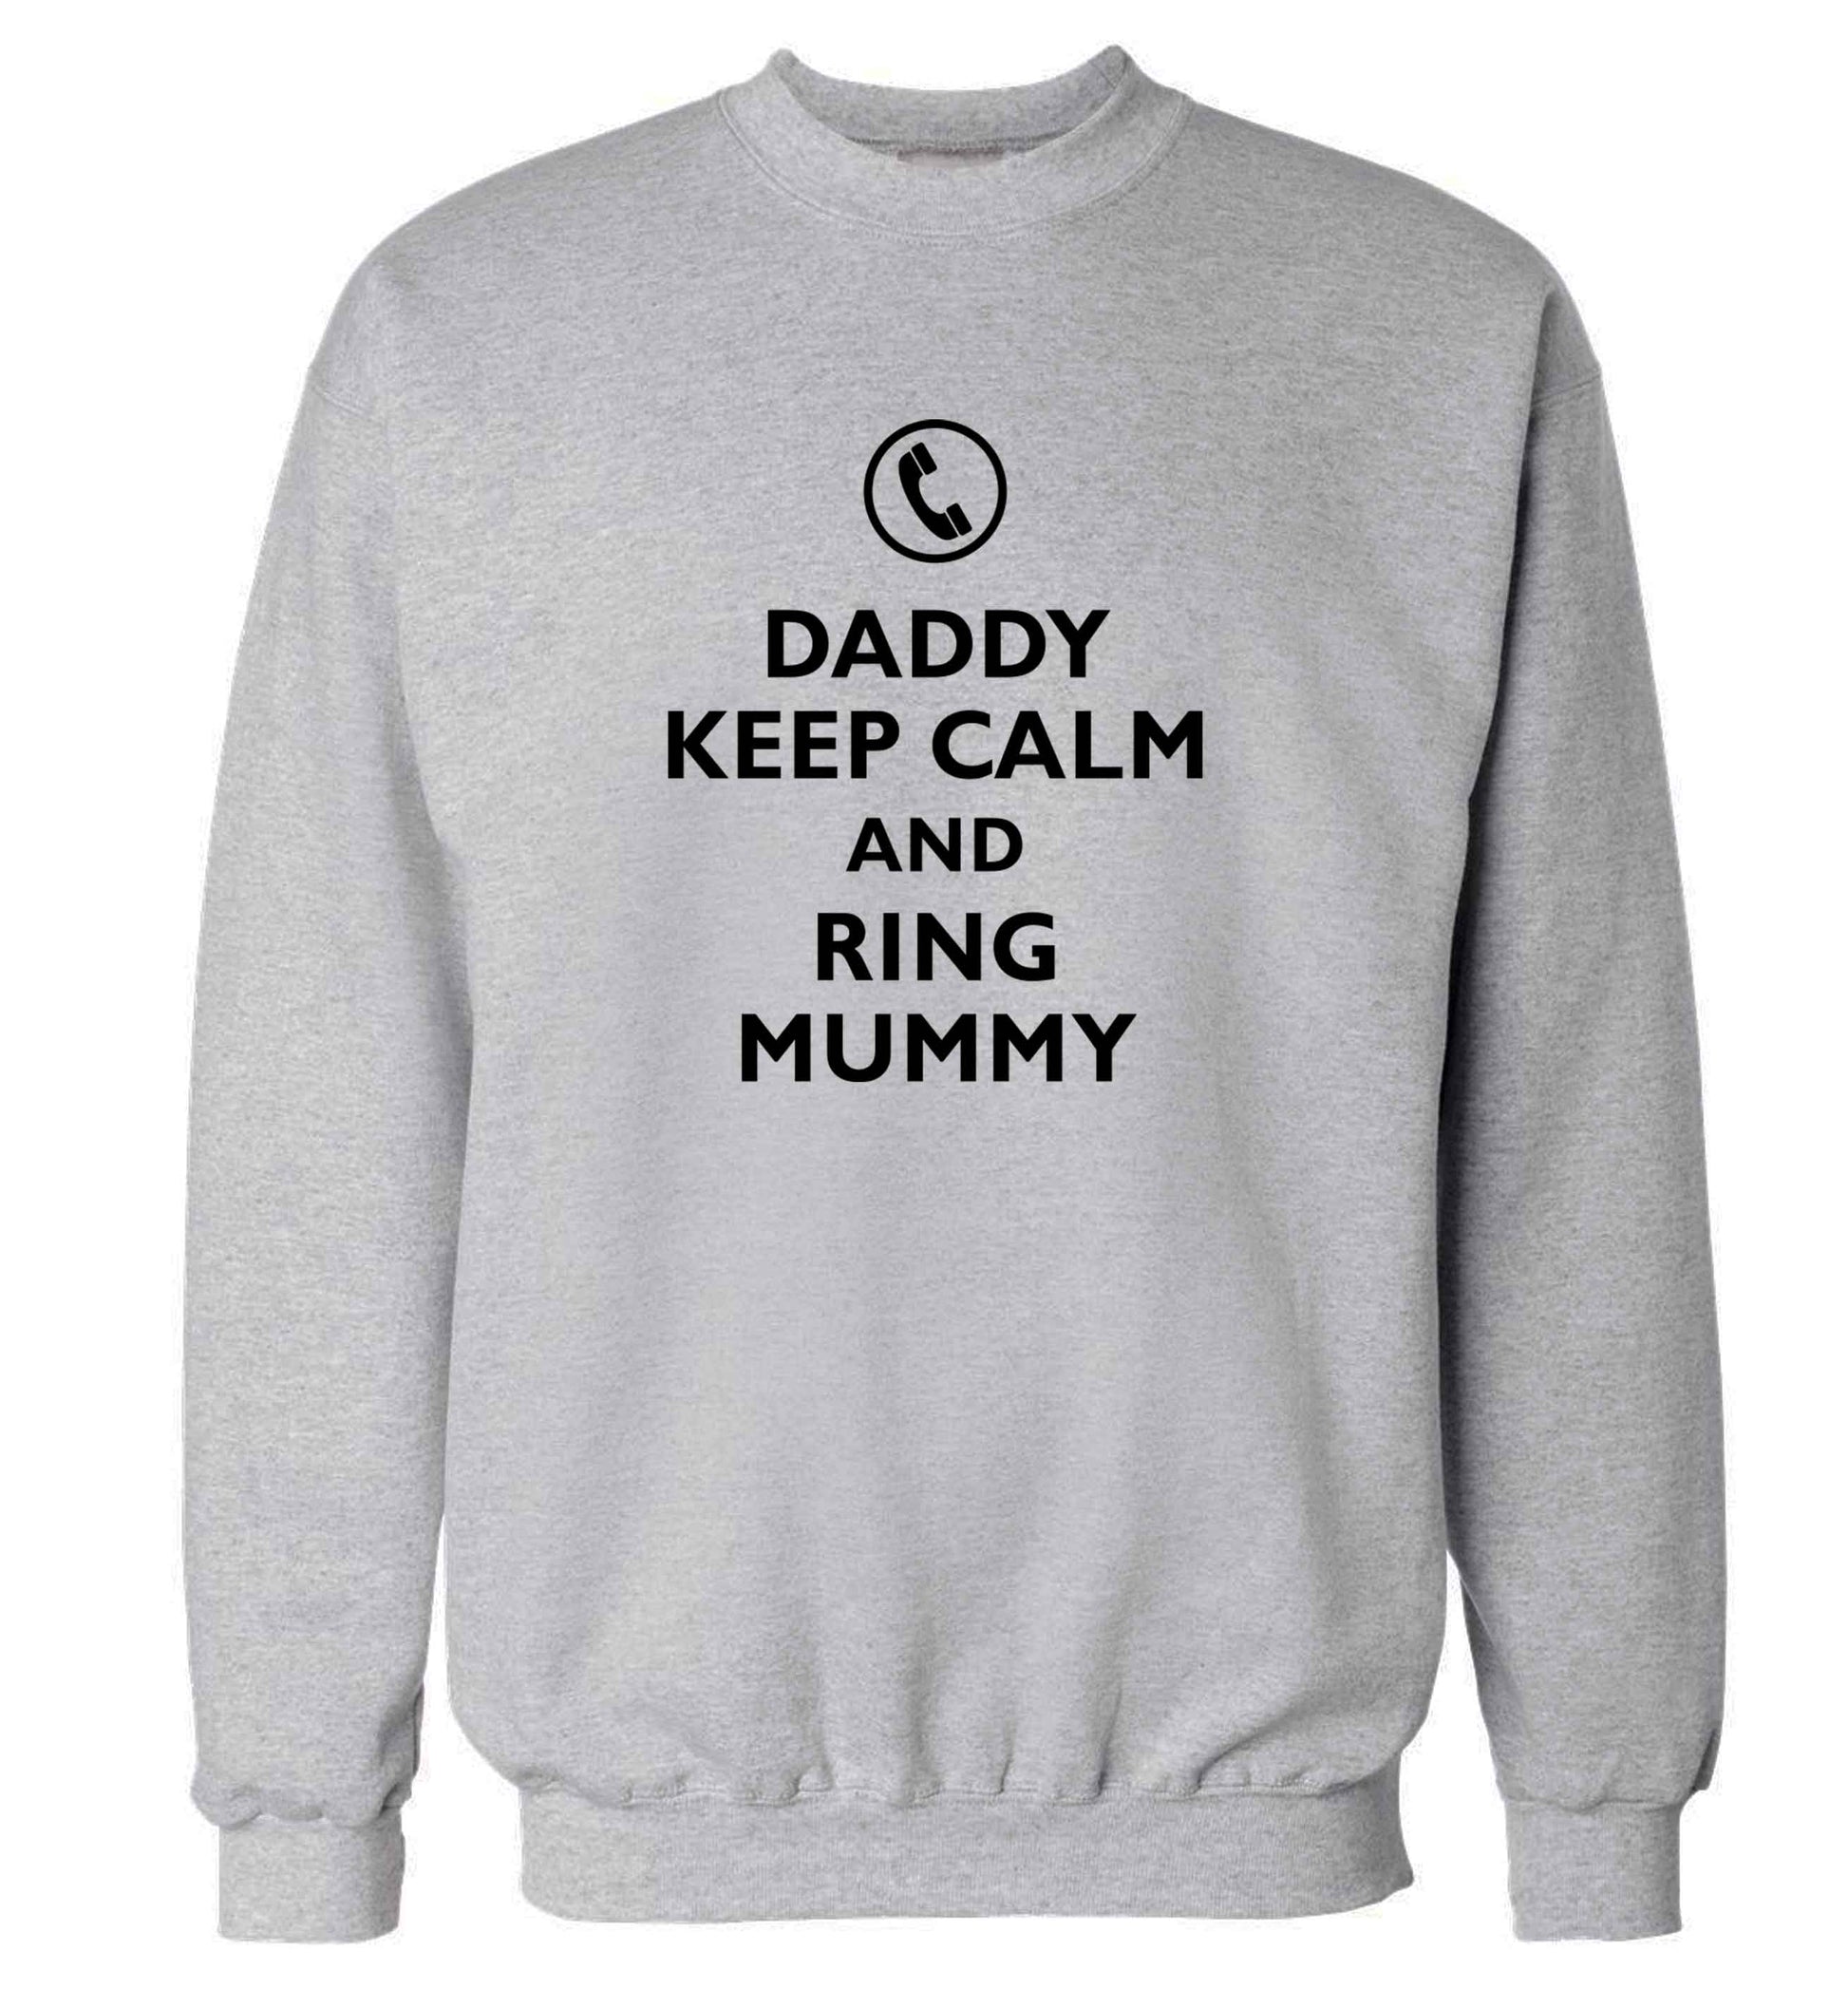 Daddy keep calm and ring mummy adult's unisex grey sweater 2XL